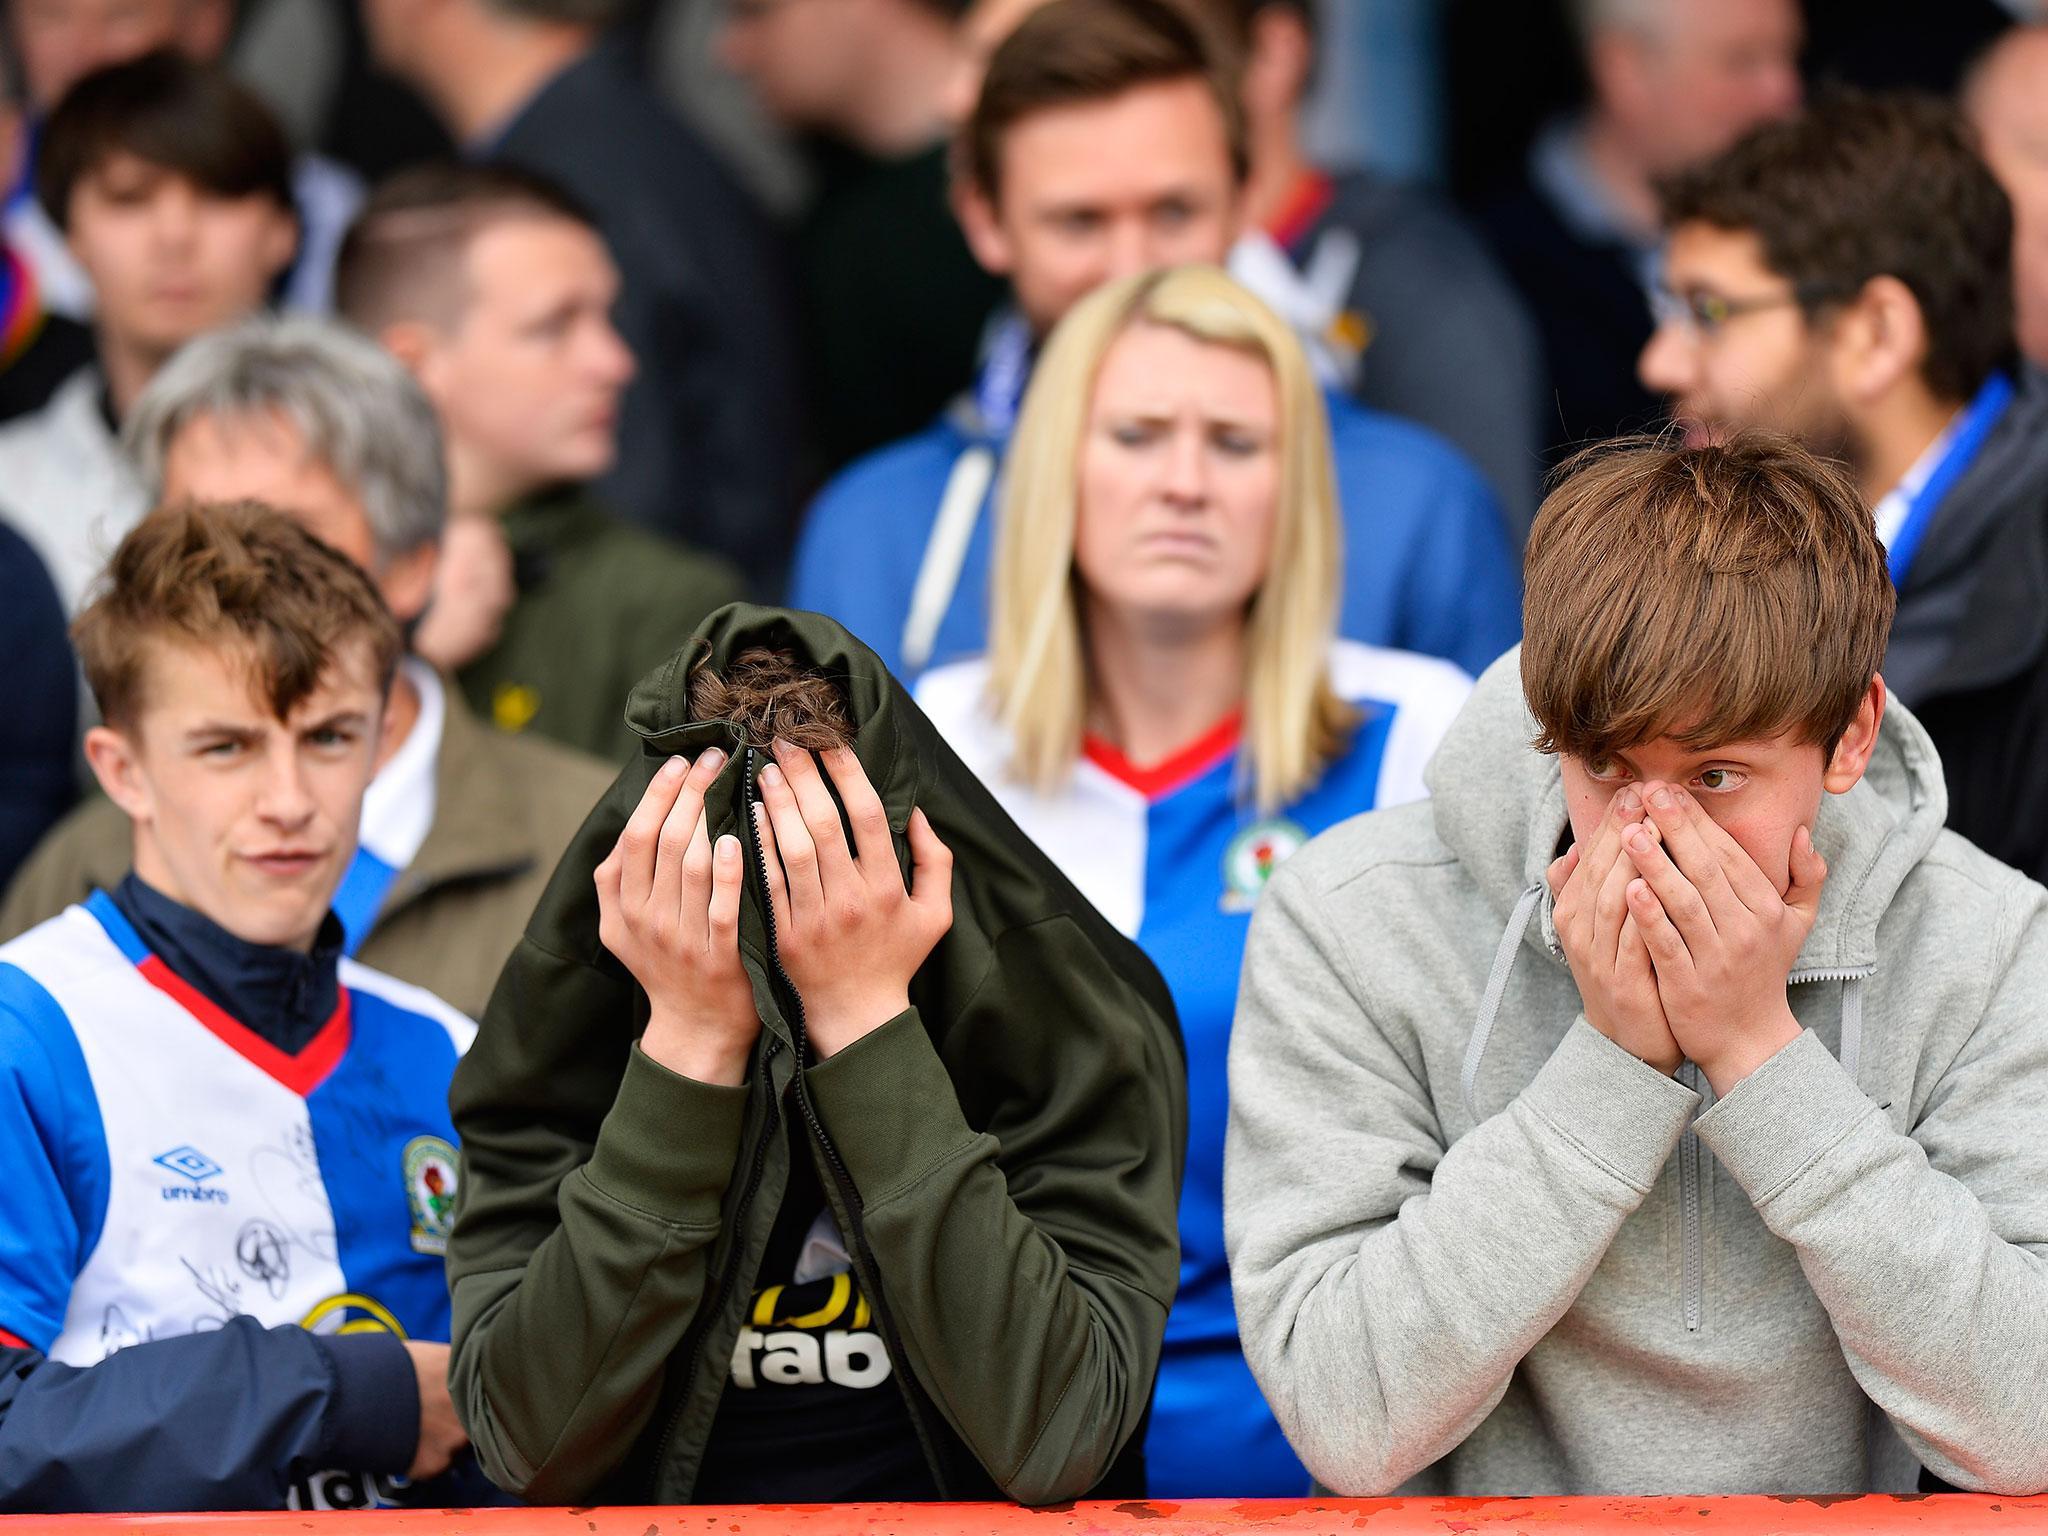 Blackburn Rovers are staring into the abyss after relegation to League One